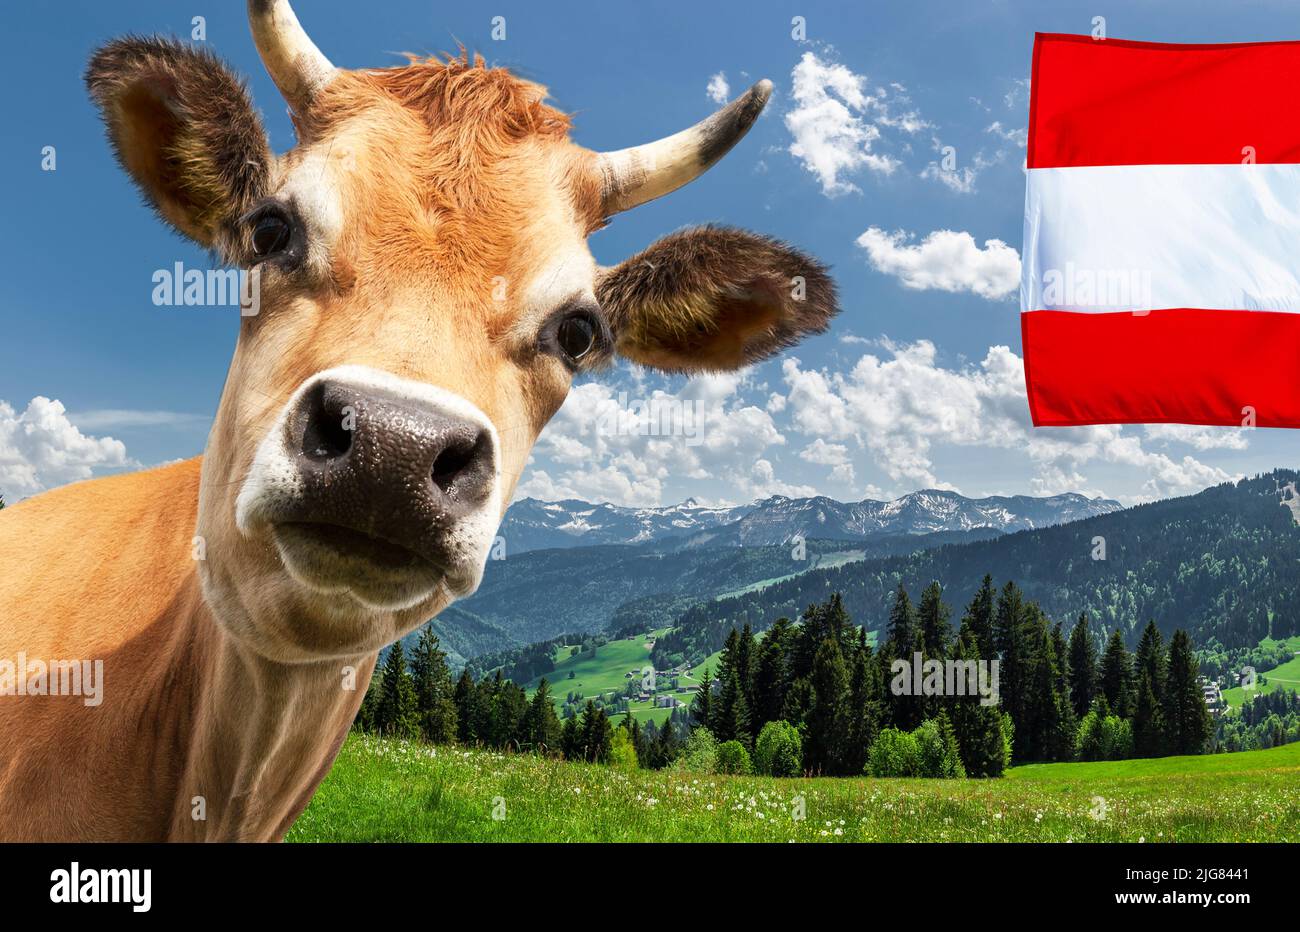 Cow with Austrian flag and apen landscape in Austria Stock Photo